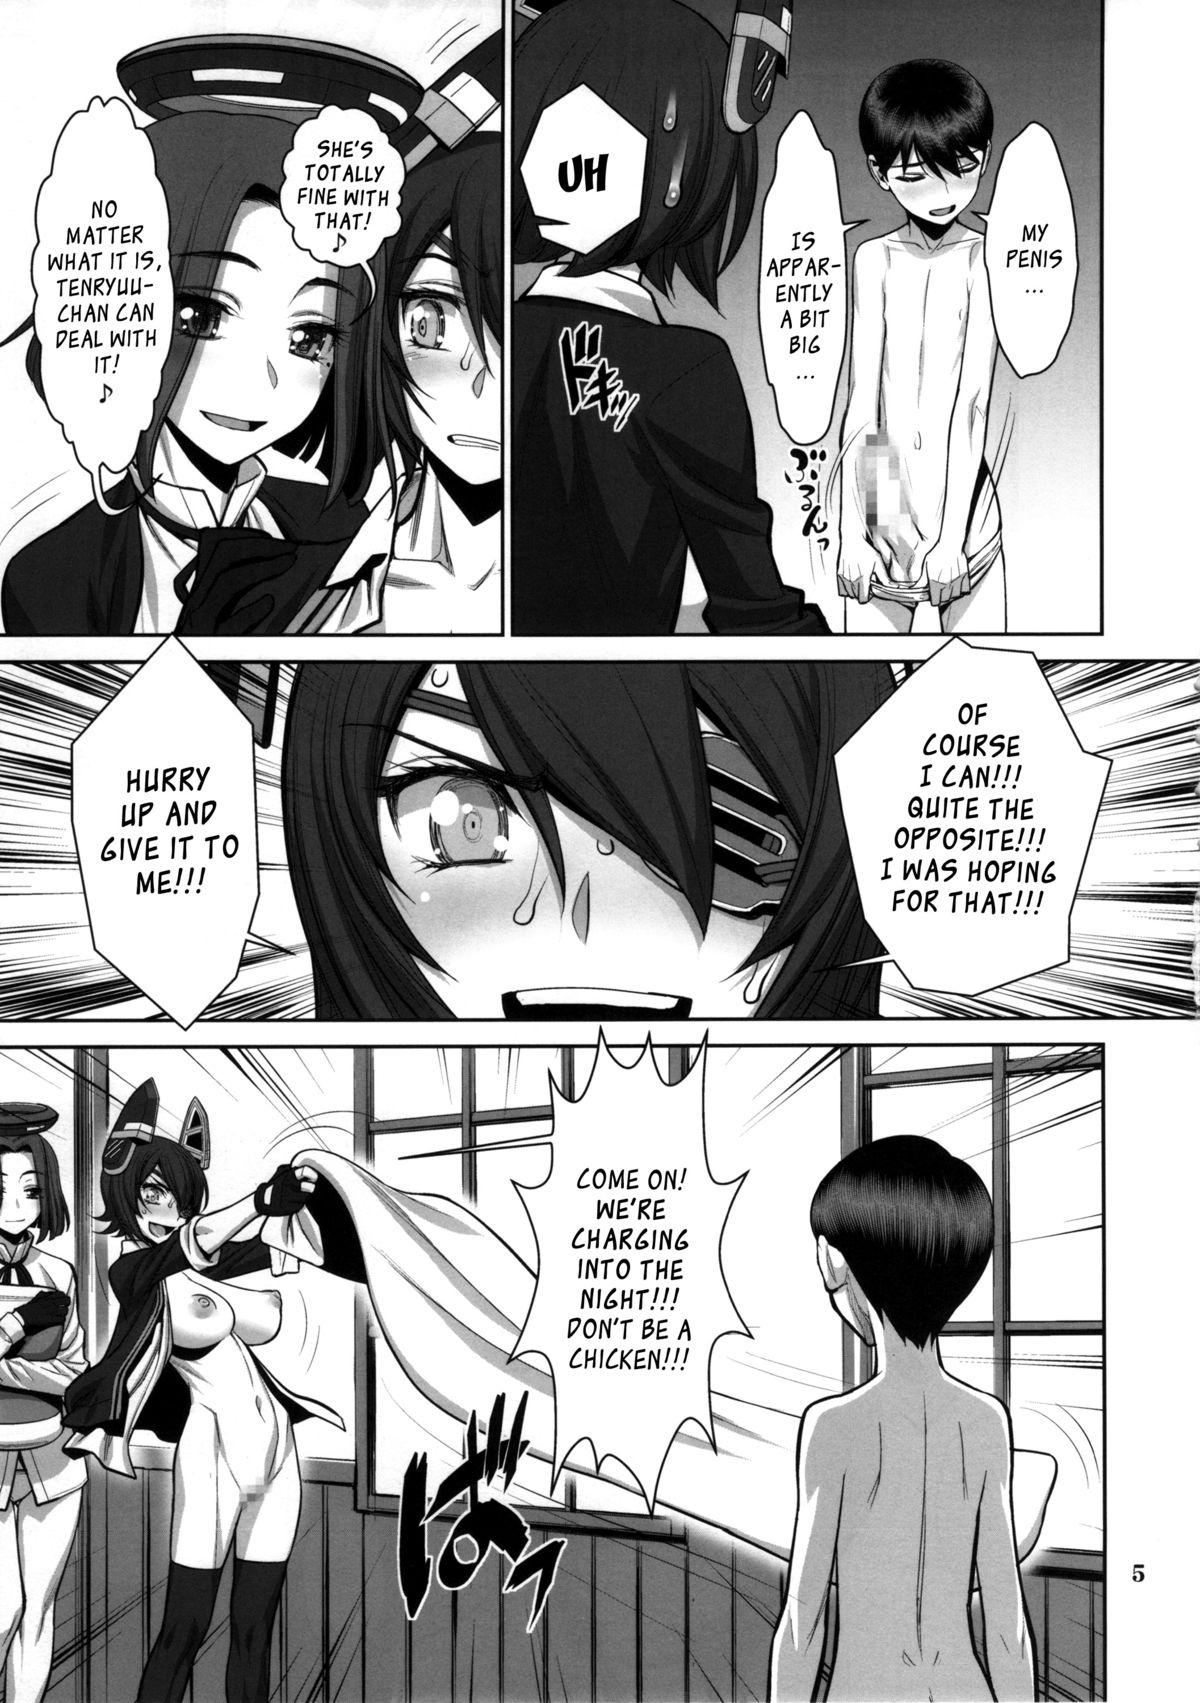 Creampies ONTFK - My Name is Tenryuu! Fufufu... You Scared? - Kantai collection Hard Core Free Porn - Page 4